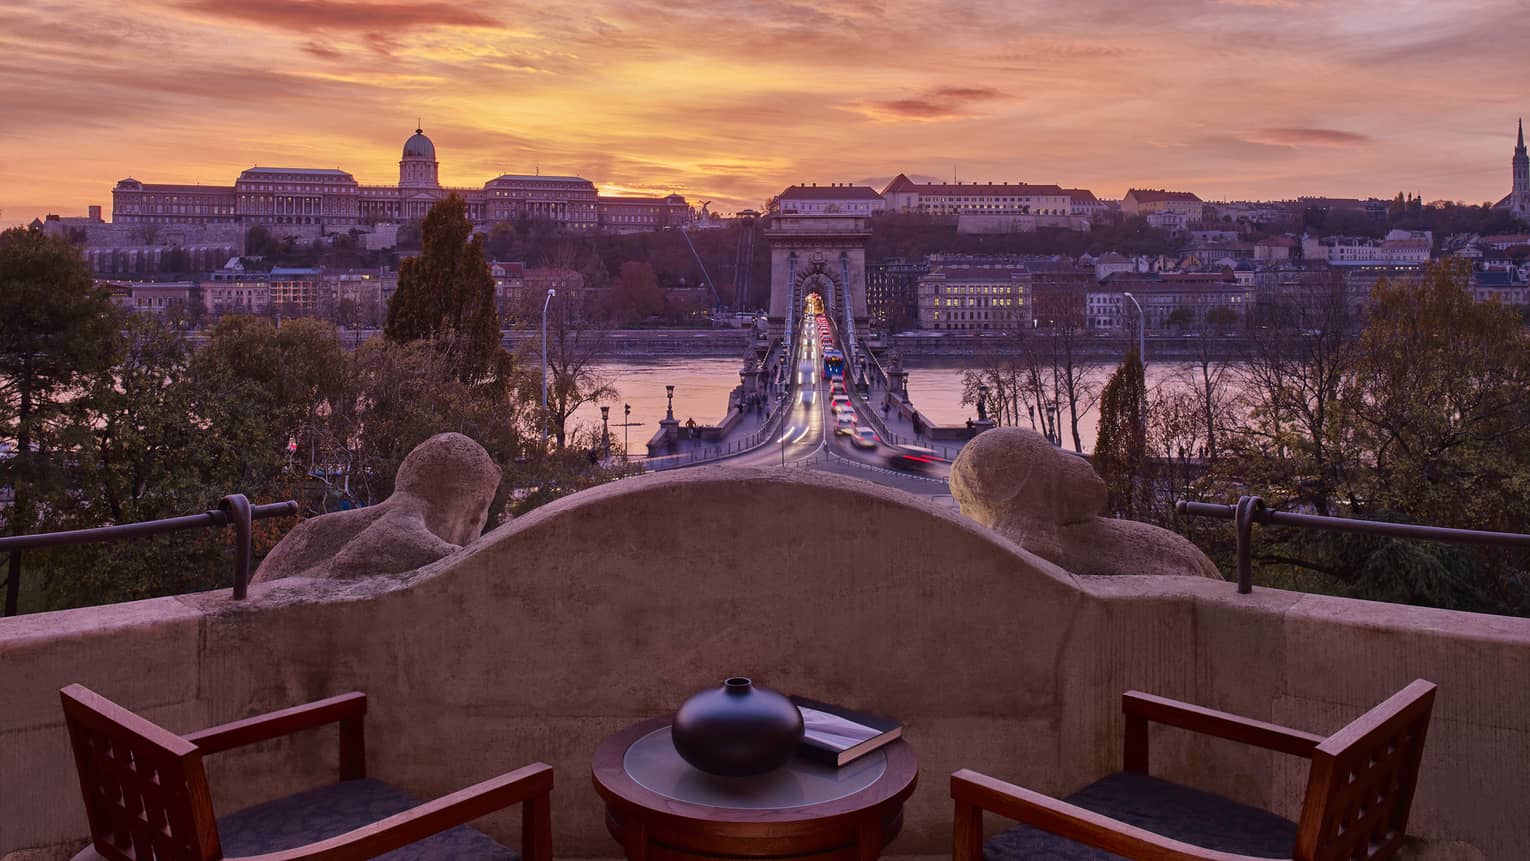 Royal Suite stone balcony with Danube River and Budapest view at sunset